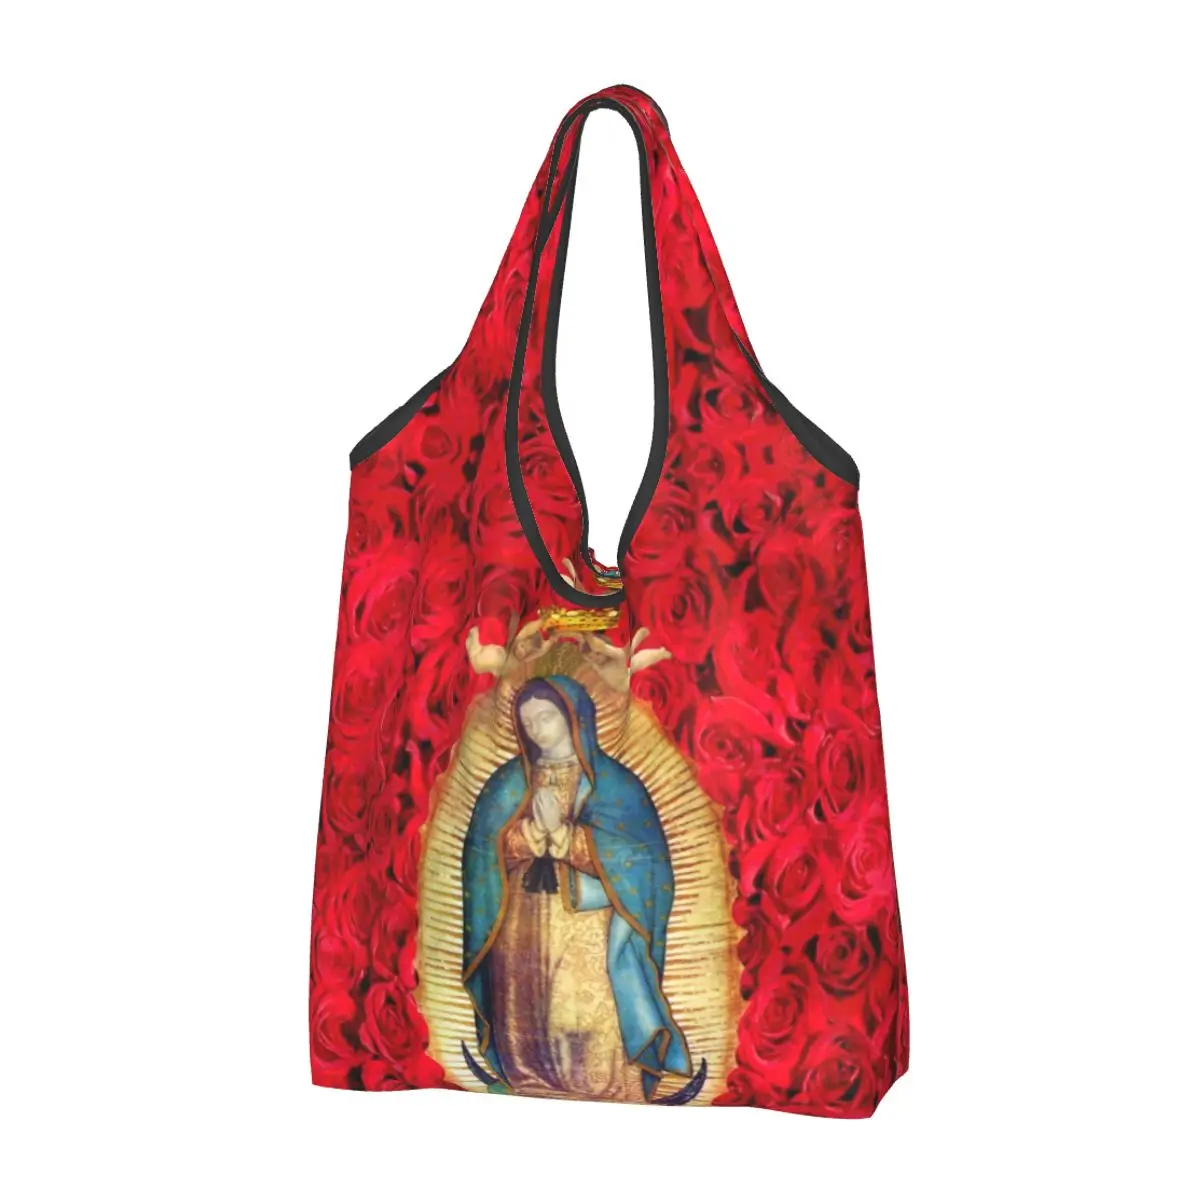 

Guadalupe Virgin Mary With Flowers Groceries Shopping Bag Shopper Tote Shoulder Bag Large Capacity Portable Catholic Handbag